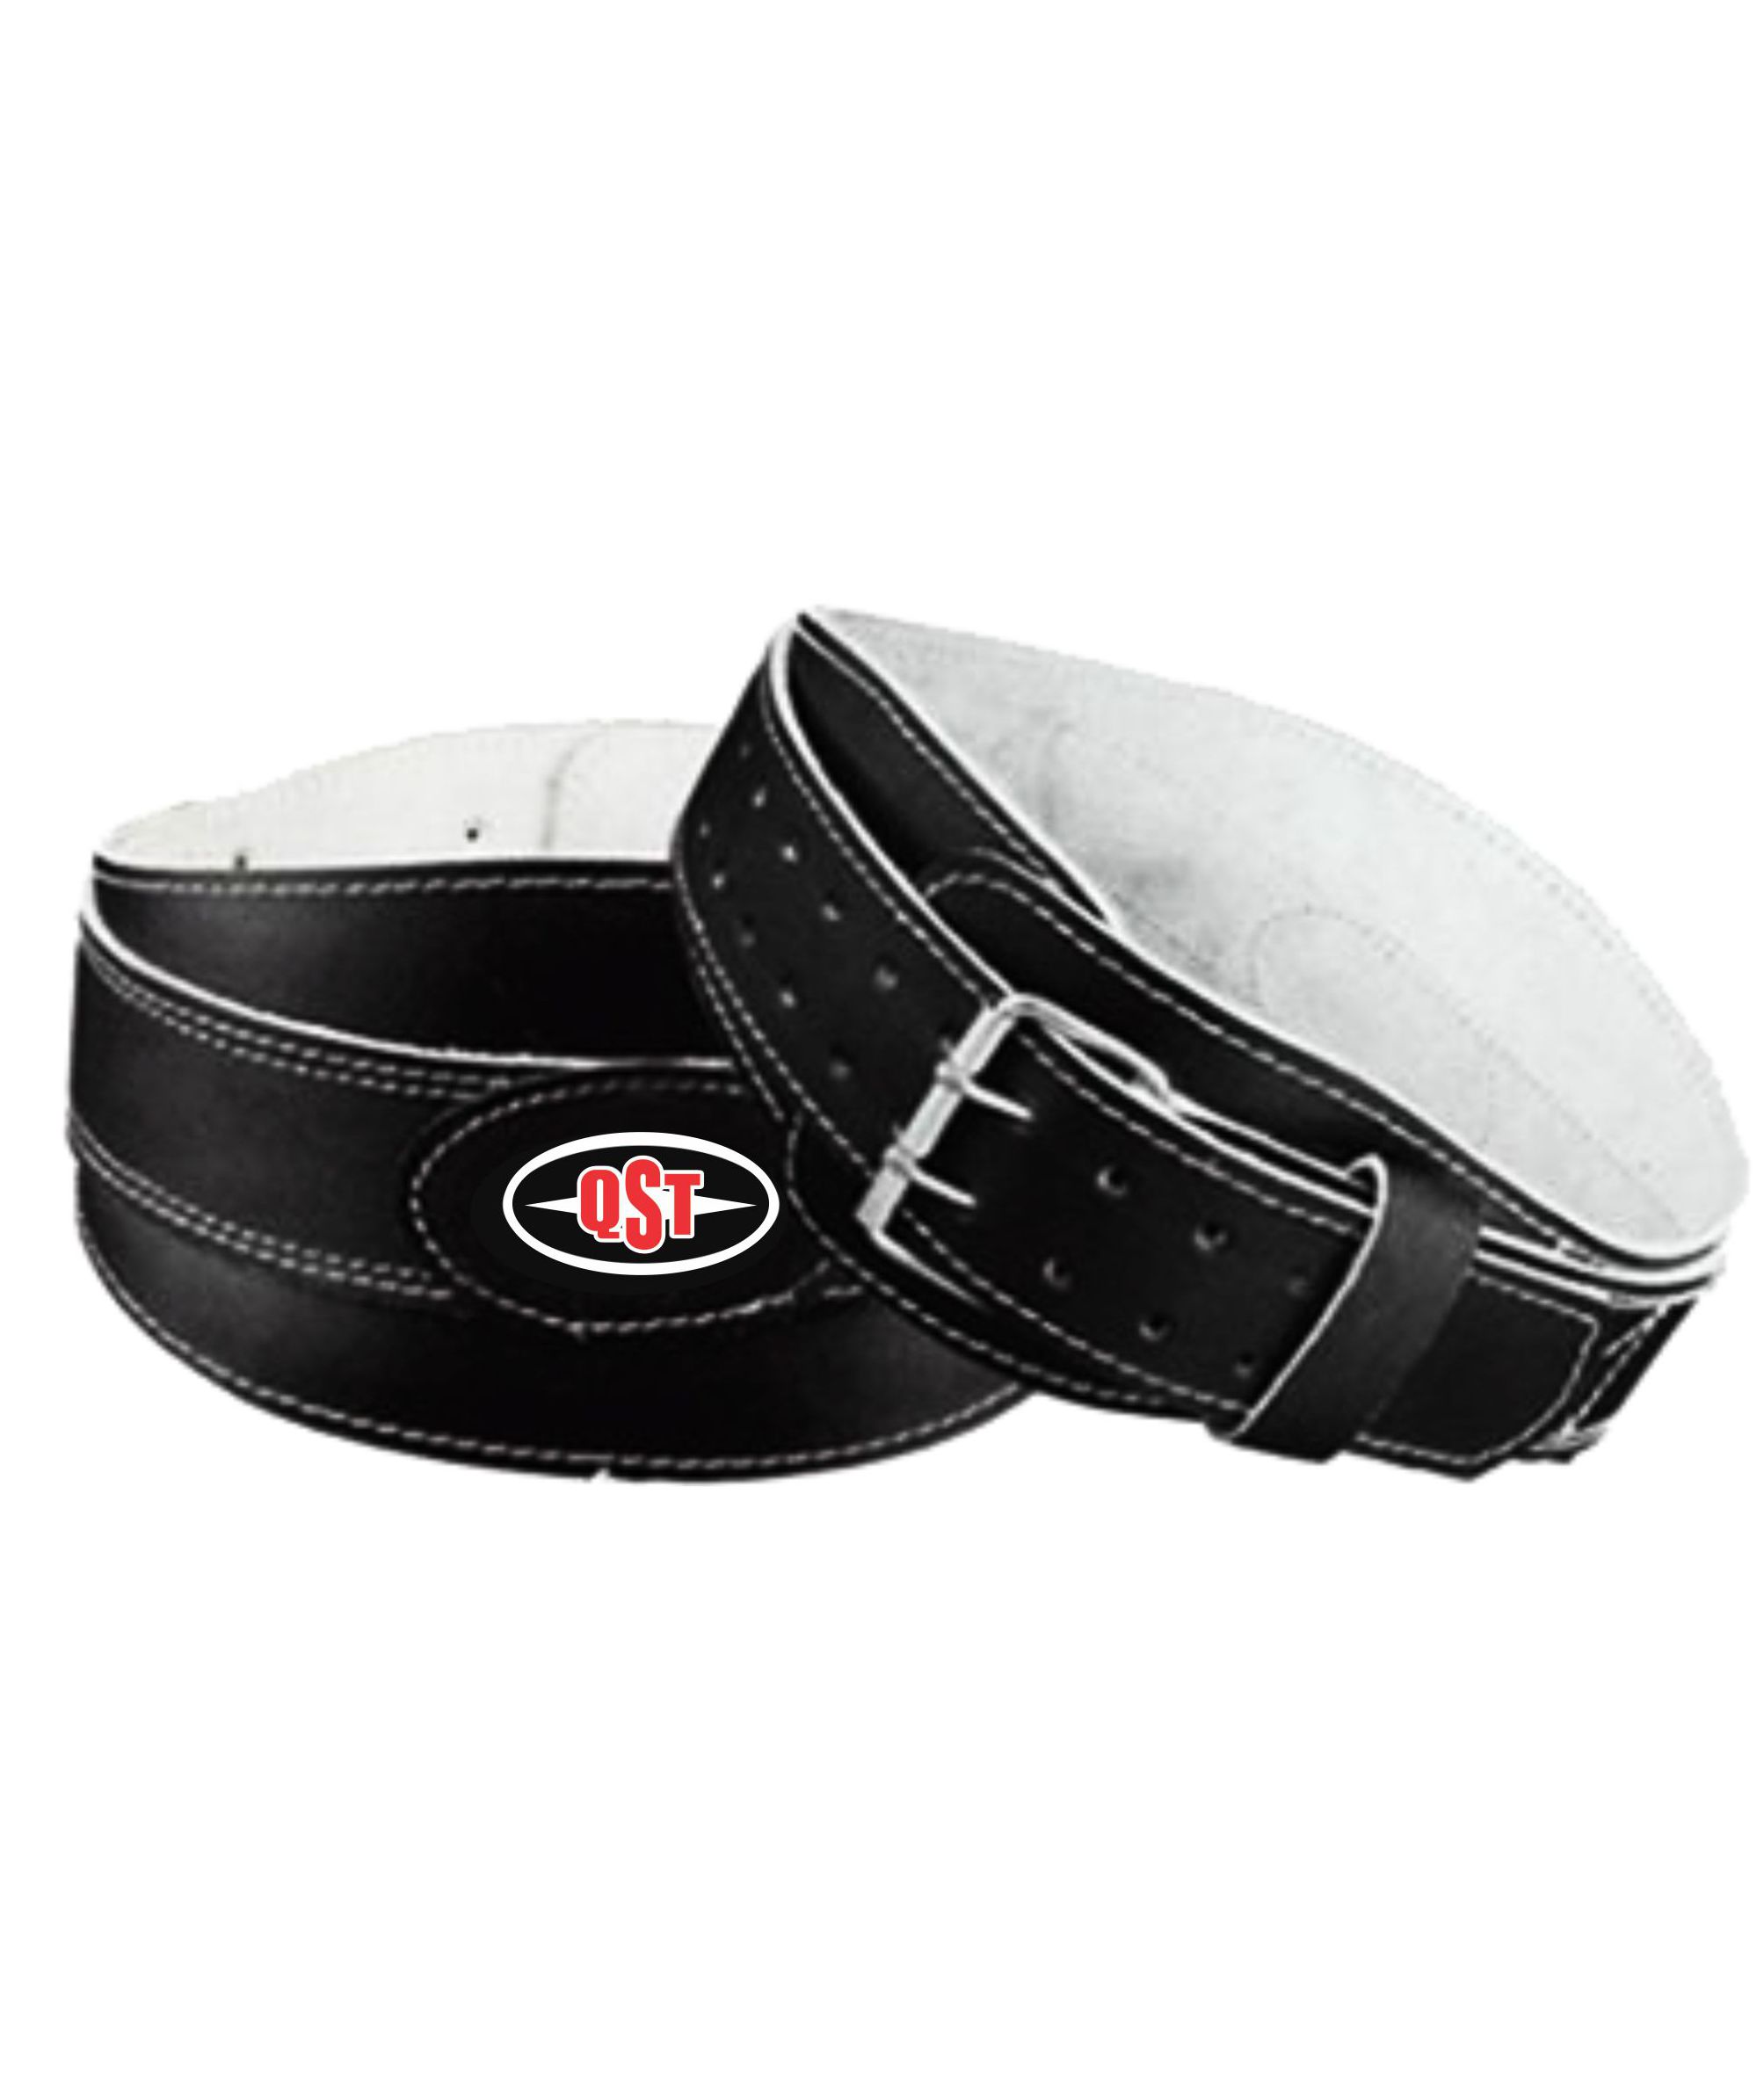 Leather Weightlifting Belt - ACS-1548